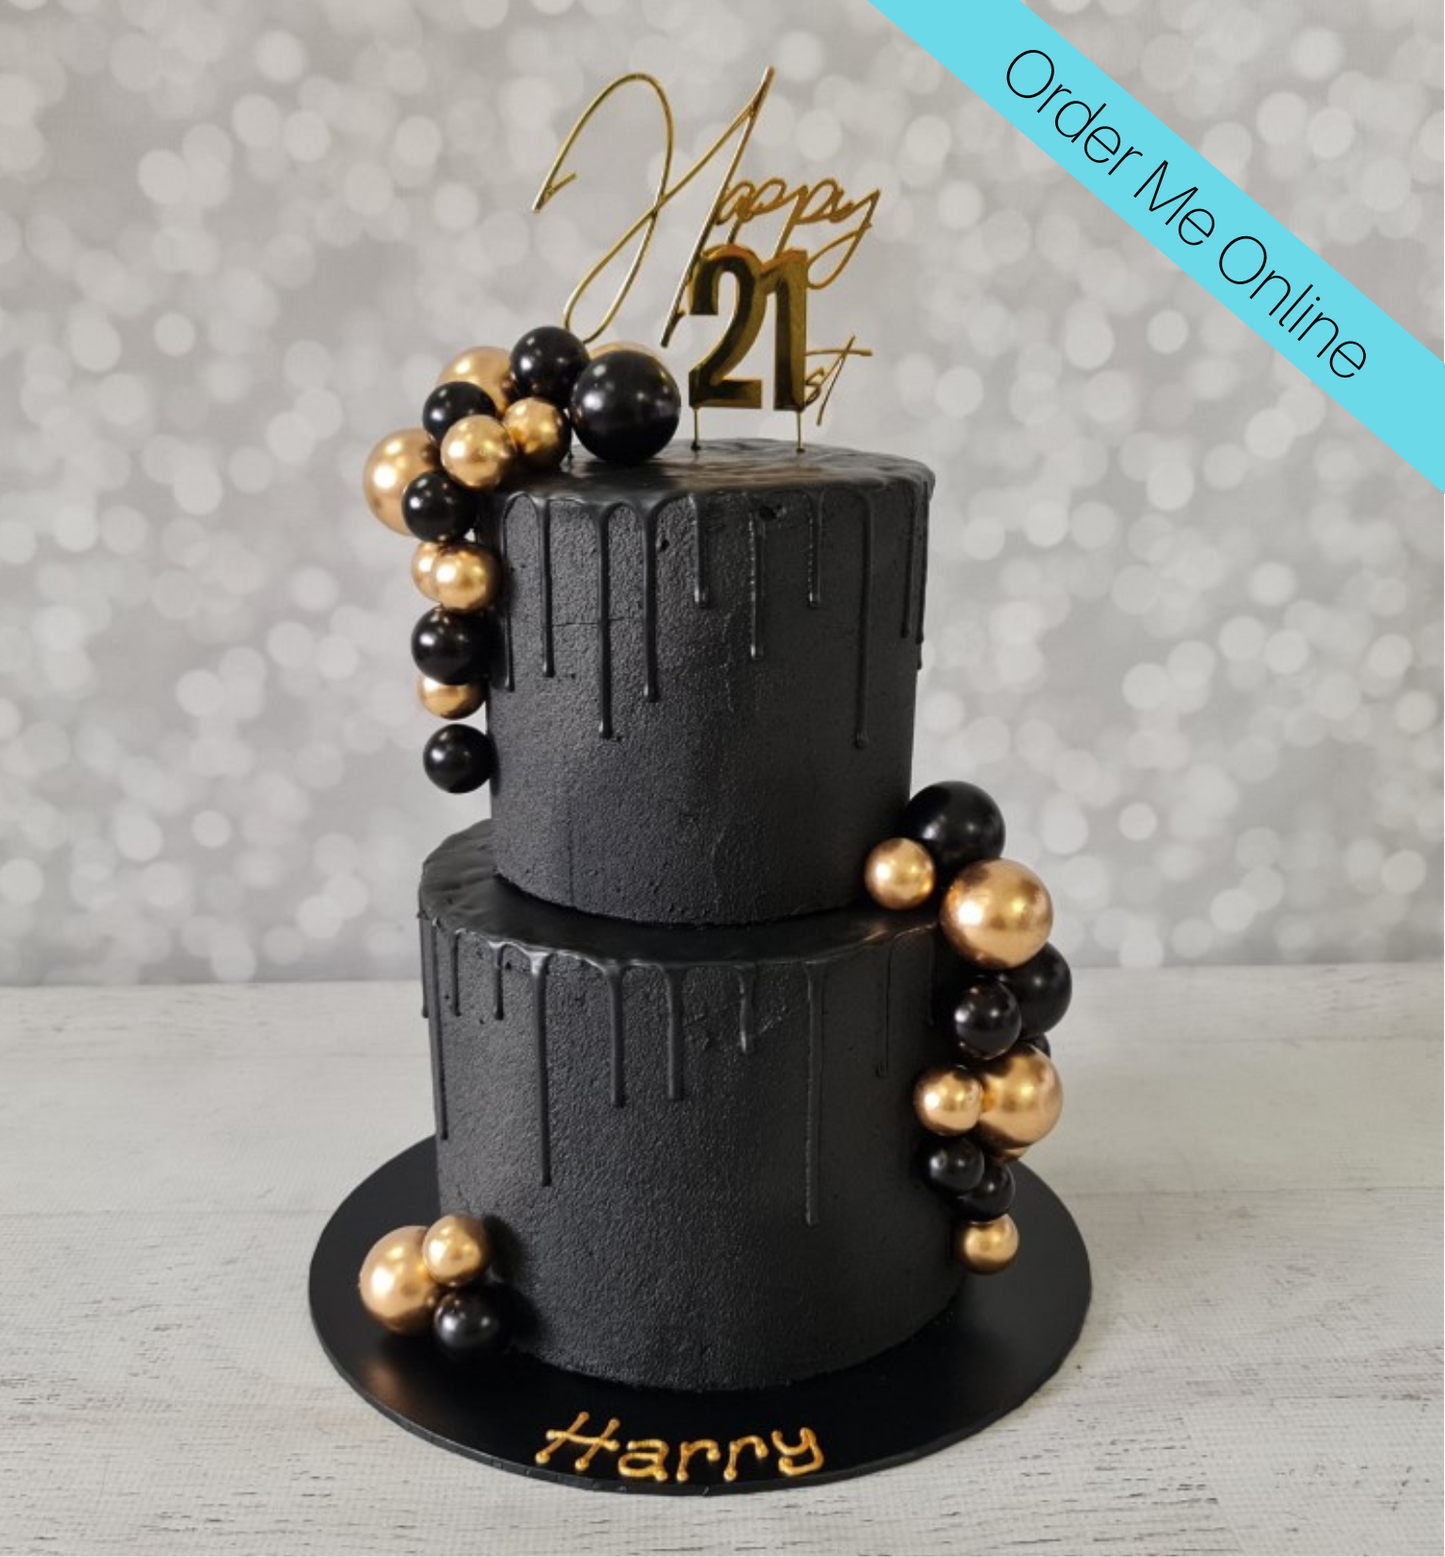 Zahra Cakes based in Altrincham near Manchester create fresh cream cakes,  fondant cakes, eggless cakes and cupcakes for all occasions. - Zahra Cakes  Makers of Gourmet Cakes, Eggless Cakes & Cupcakes